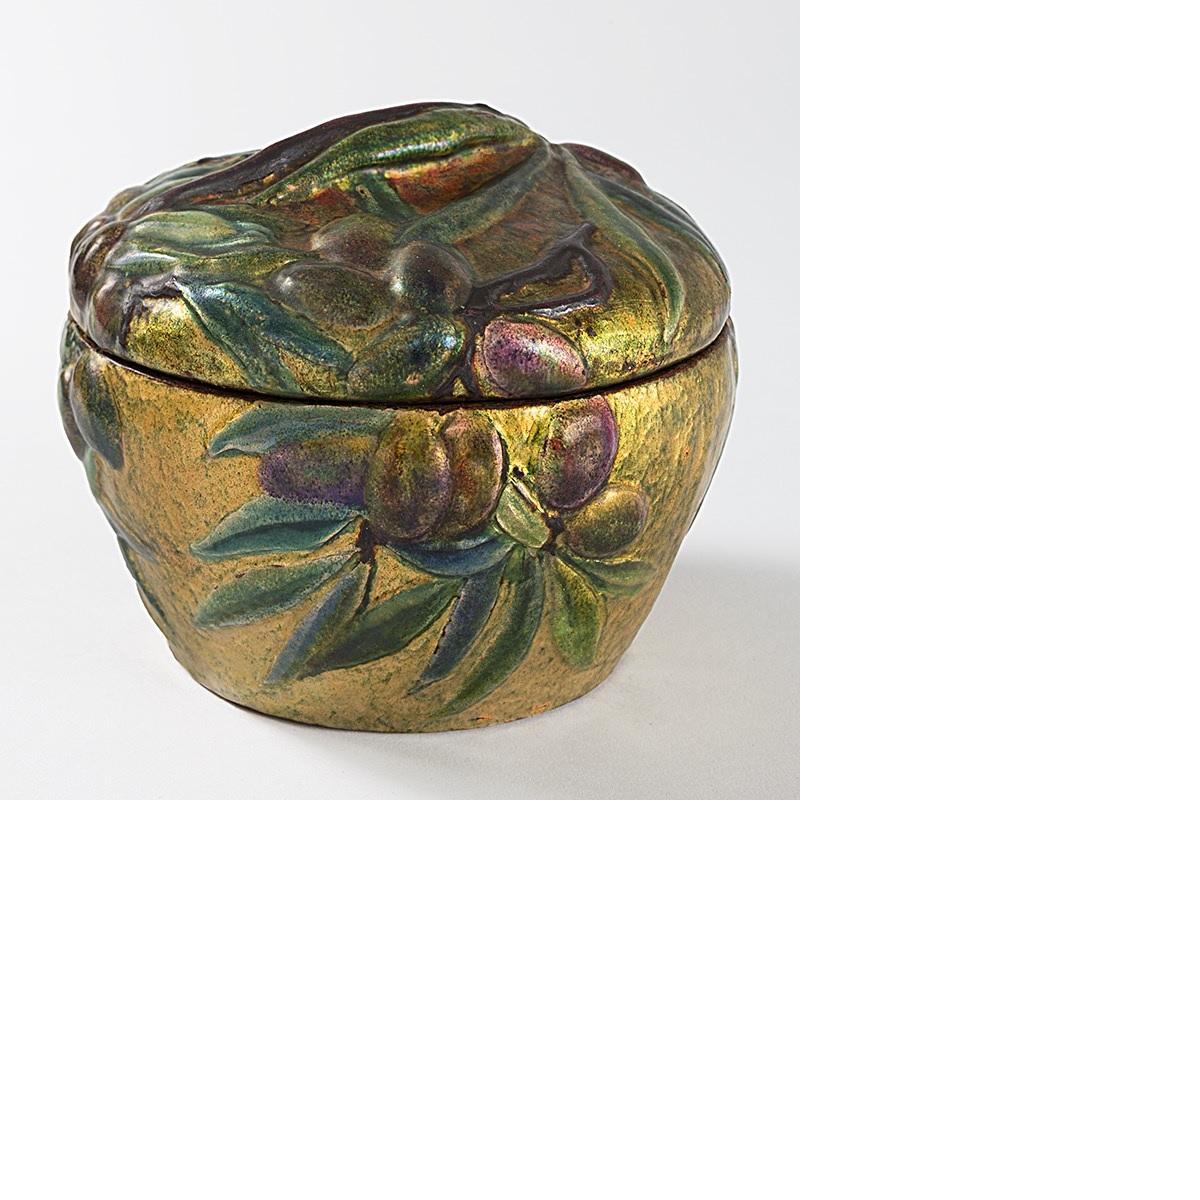 This Tiffany Studios New York covered box by Louis Comfort Tiffany, covered with an enamel 